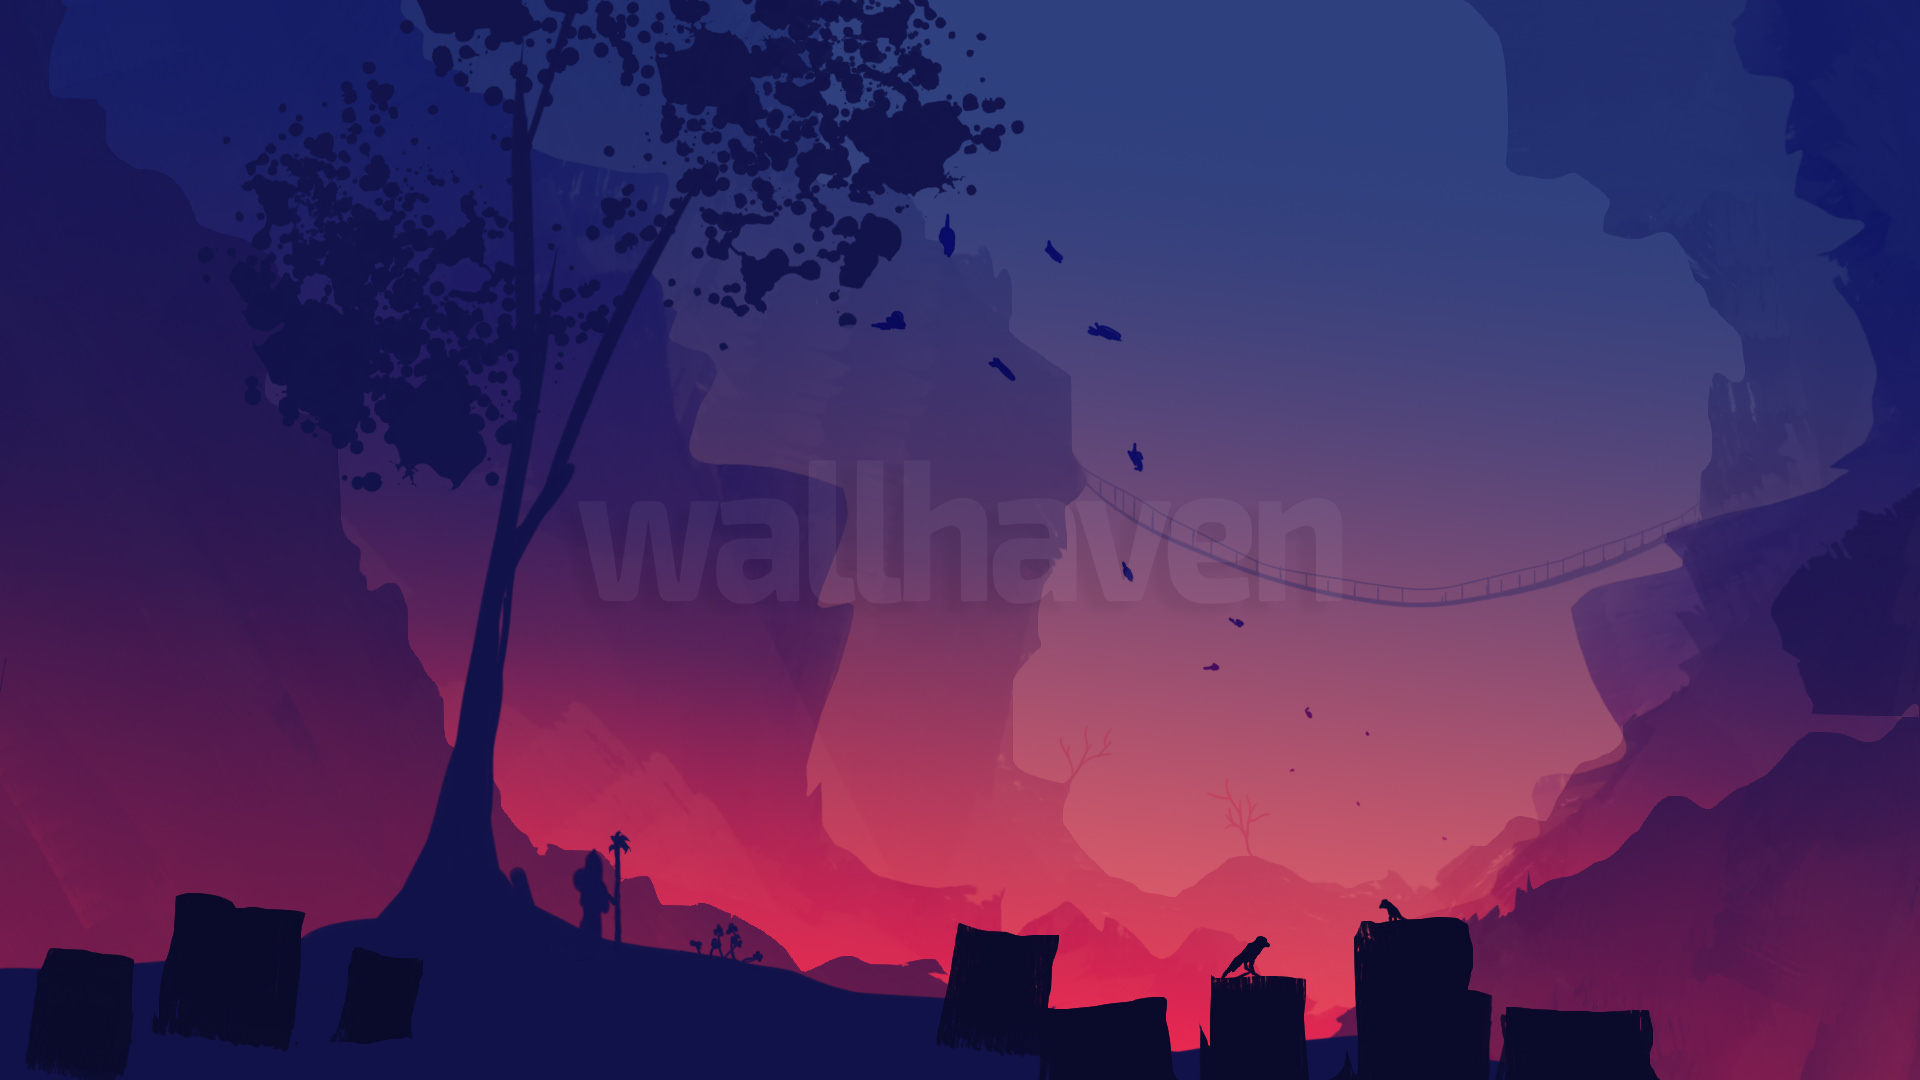 Digital Art Wallhaven Painting Trees Mountains Leaves Colorful Bridge 1920x1080